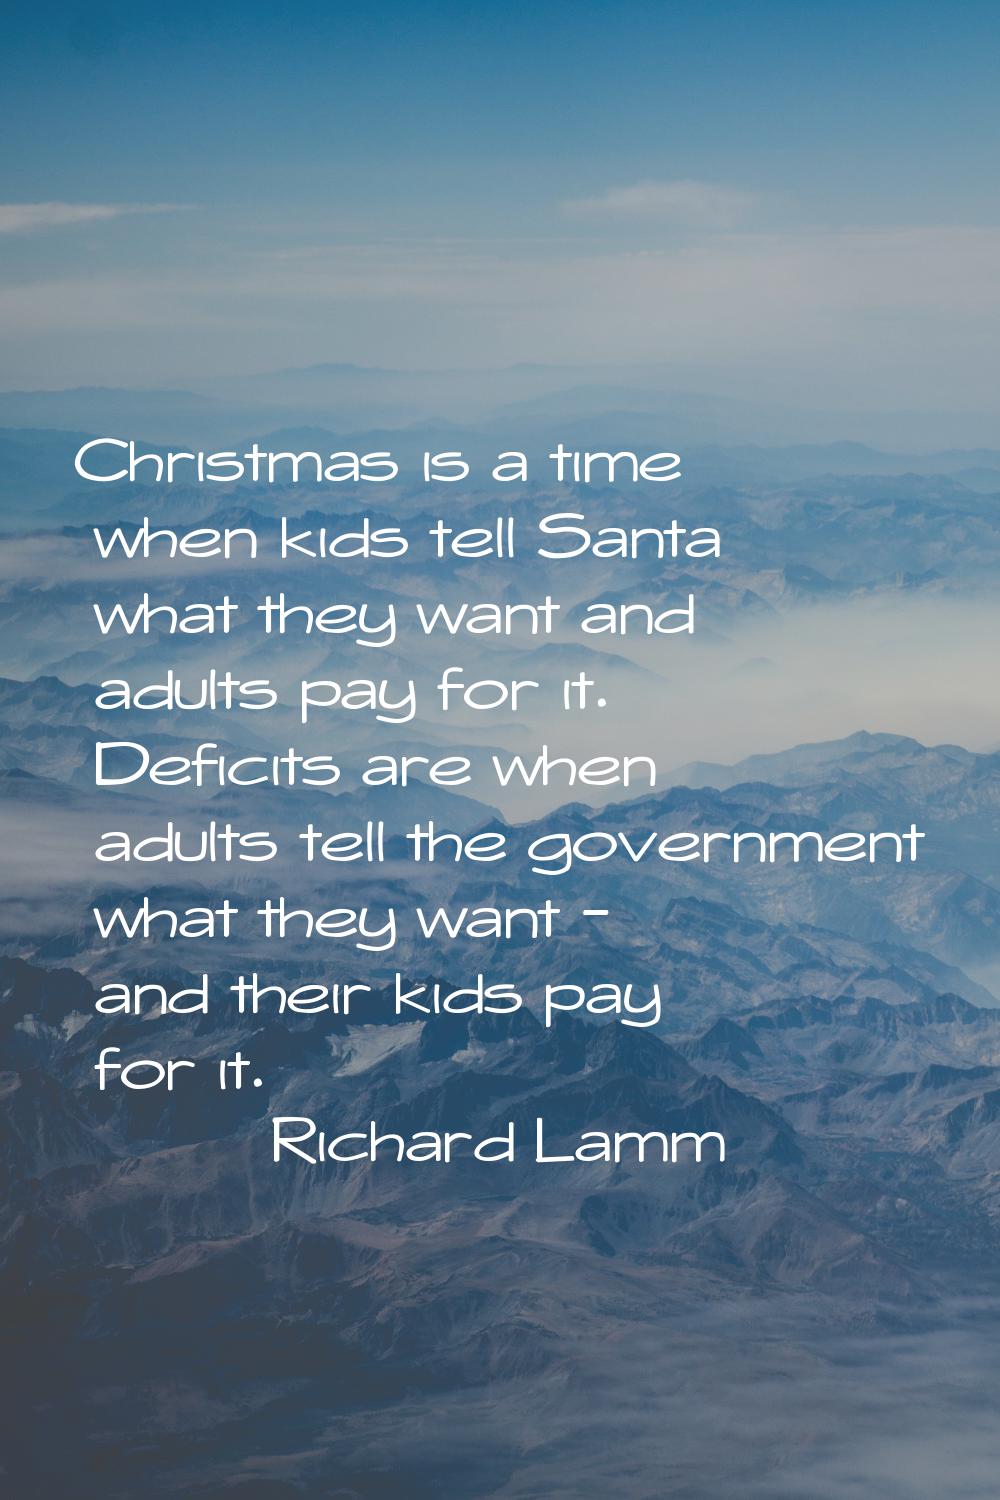 Christmas is a time when kids tell Santa what they want and adults pay for it. Deficits are when ad